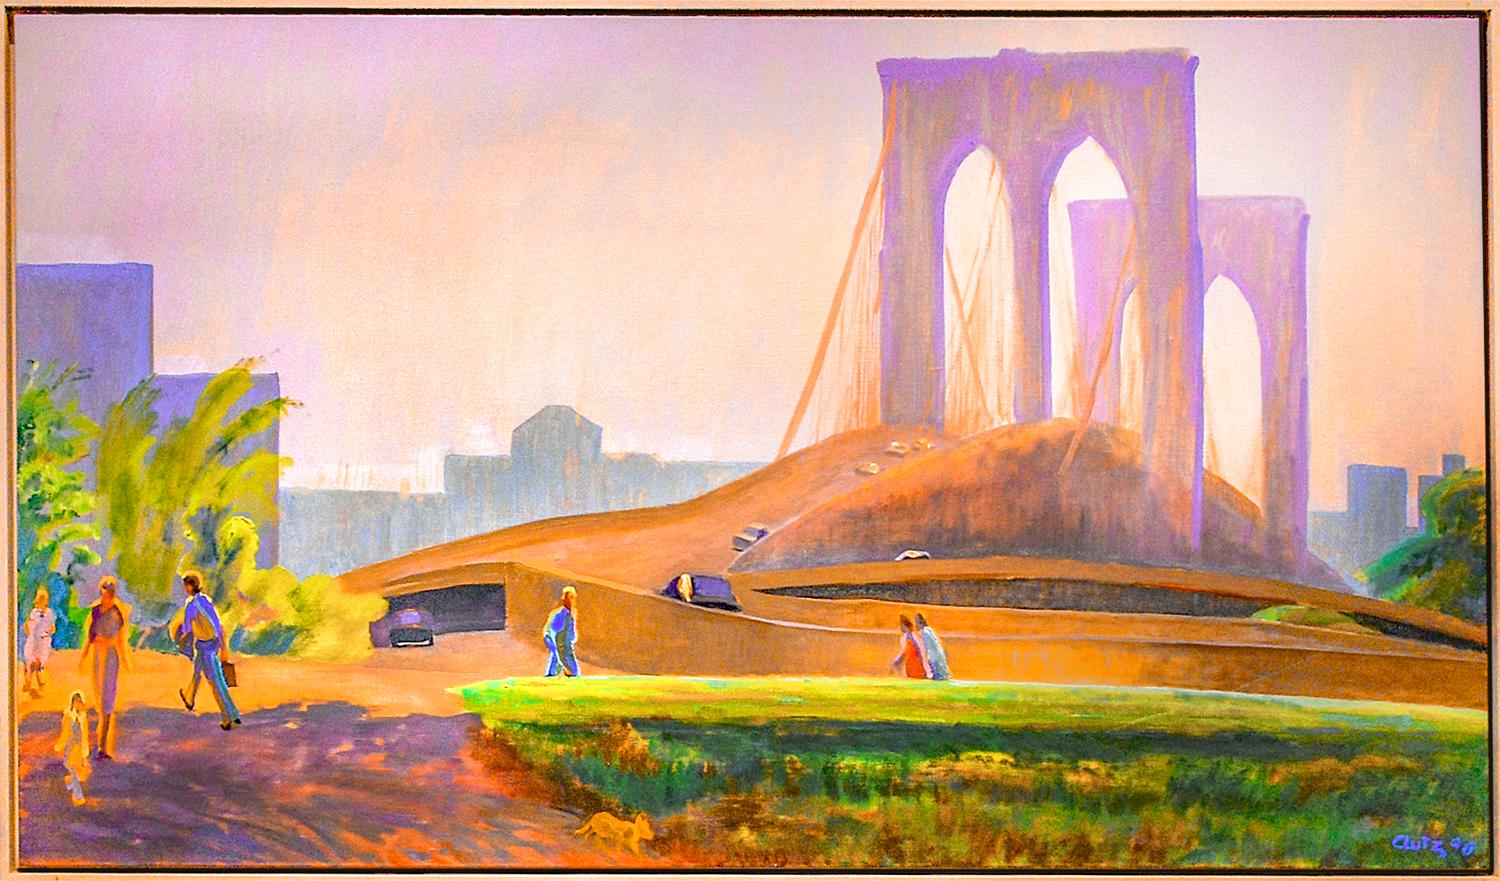 Roebling's Dream, The Great East River Bridge (NYC Cityscape by William Clutz)